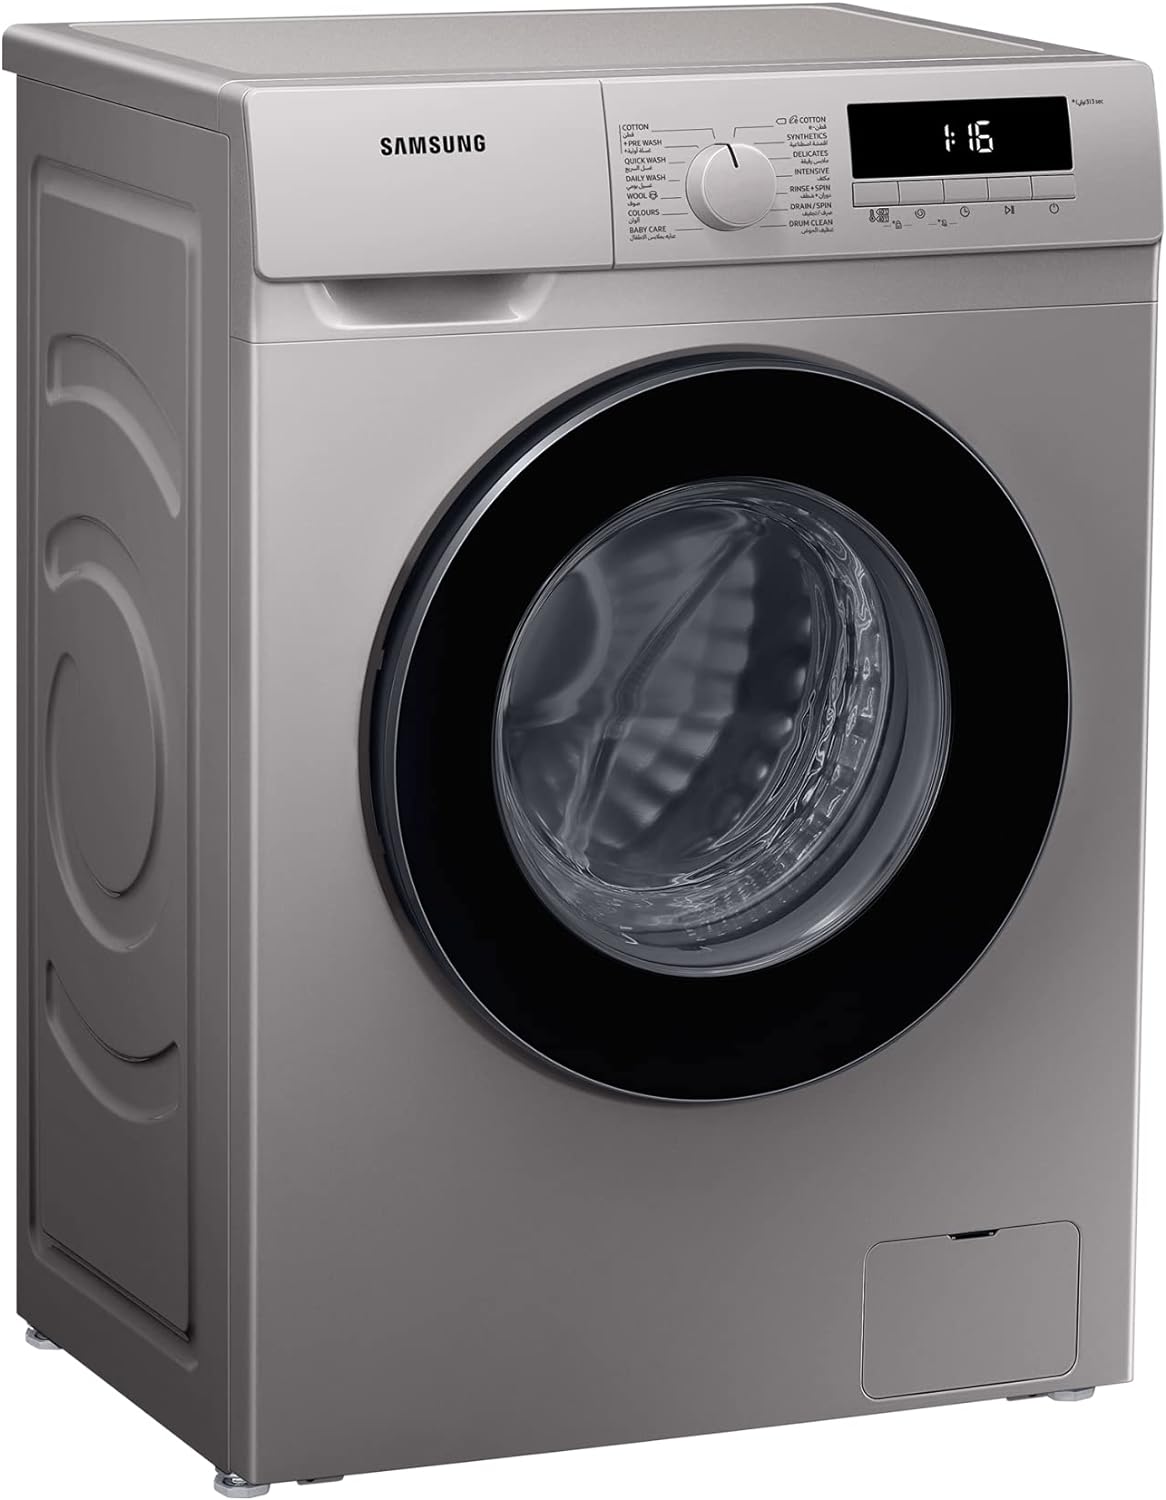 Samsung 7Kg Front Load Washing Machine With Quick Wash, Drum Clean And Delay End."Min 1 year manufacturer warranty"